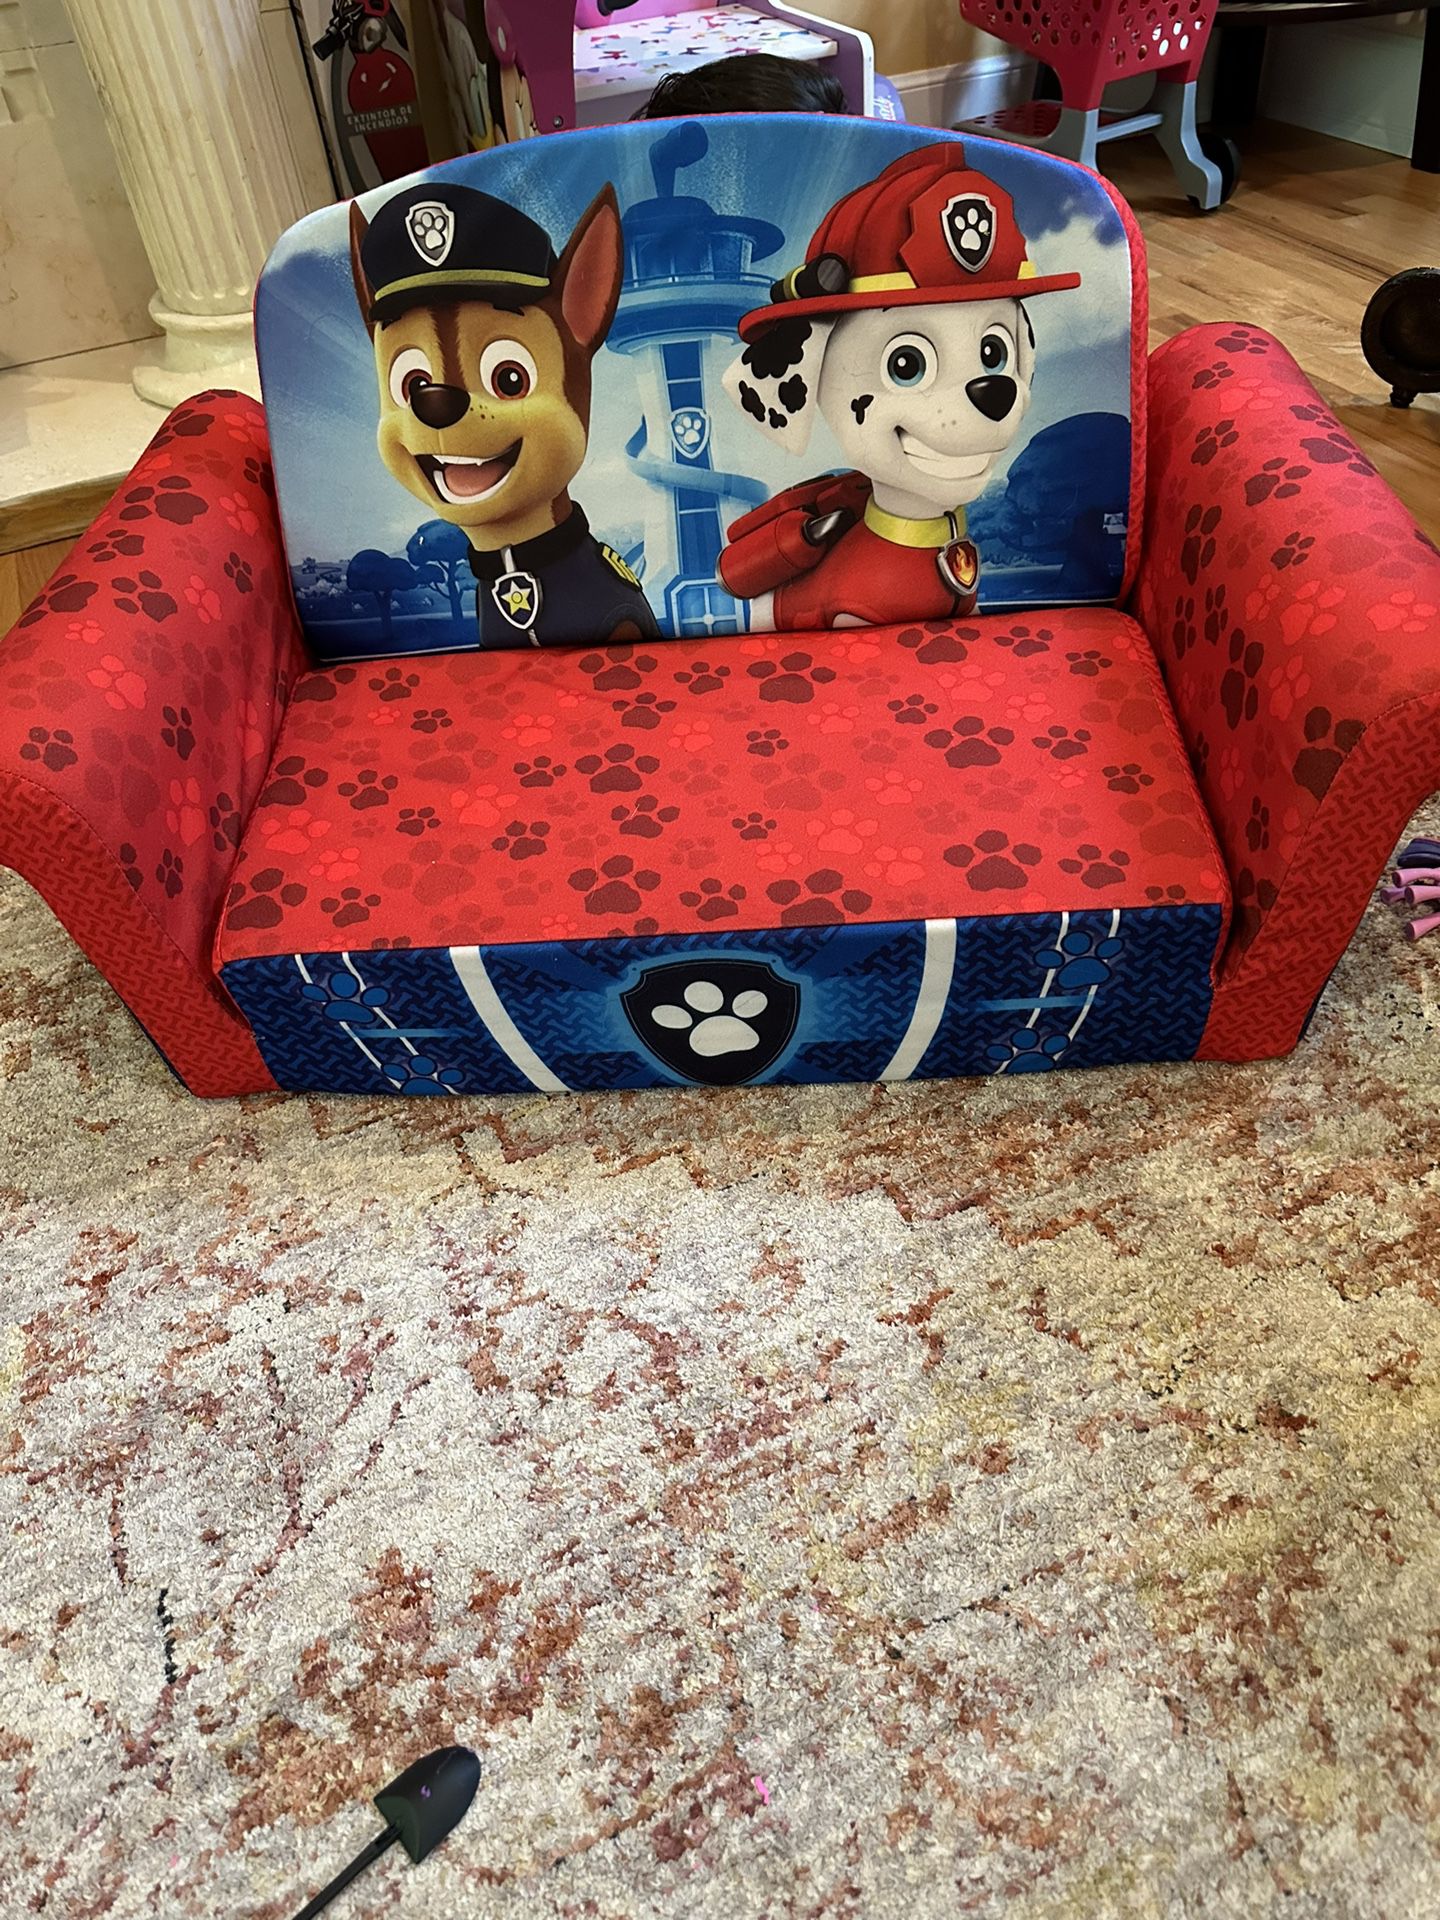 Paw Patrol Flip Out sofa Couch